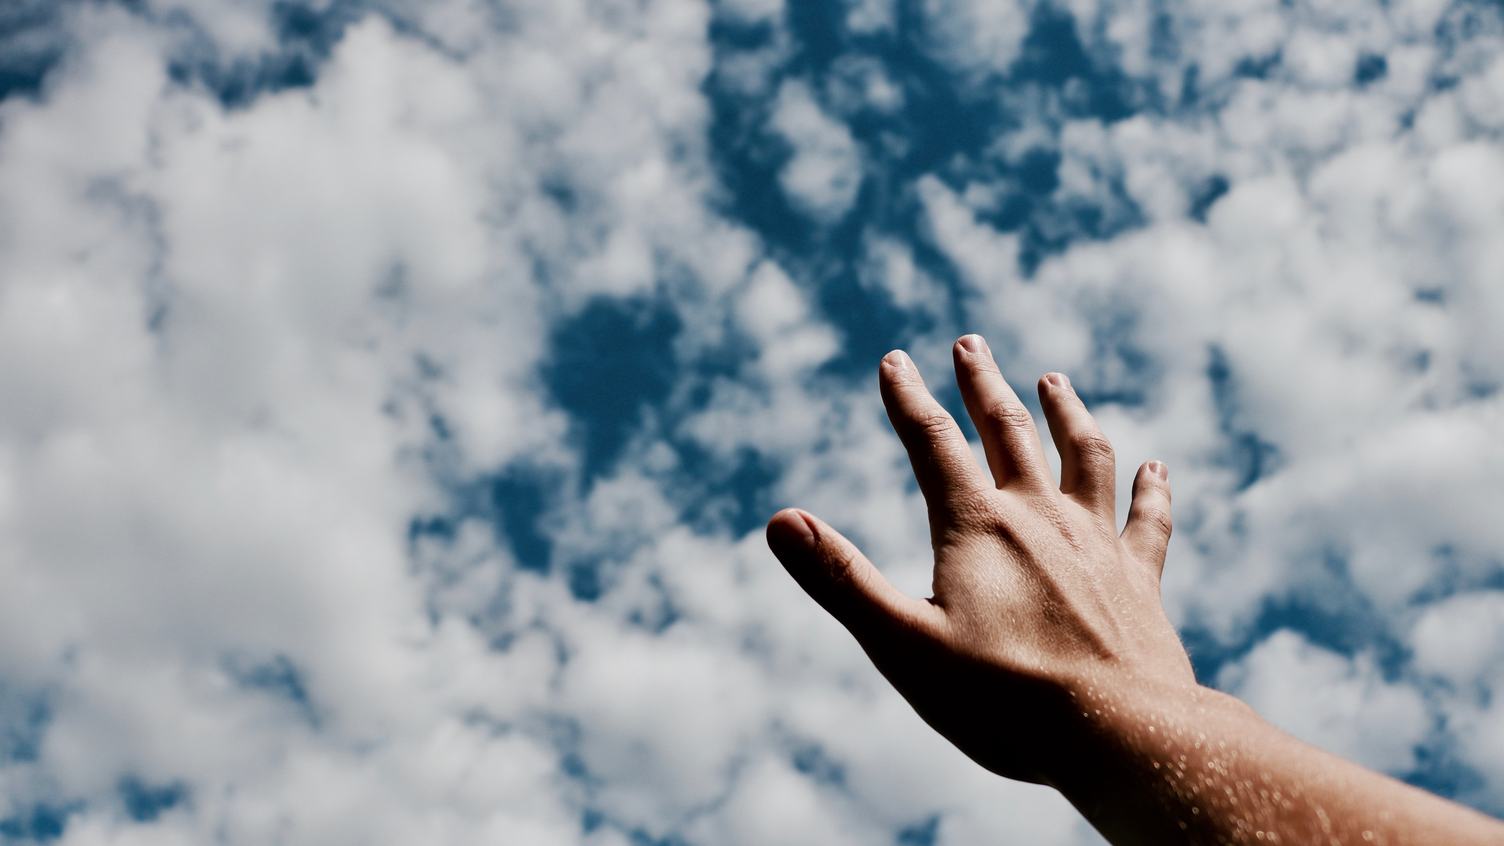 Free Photo Human Hand Against Blue Sky With Clouds